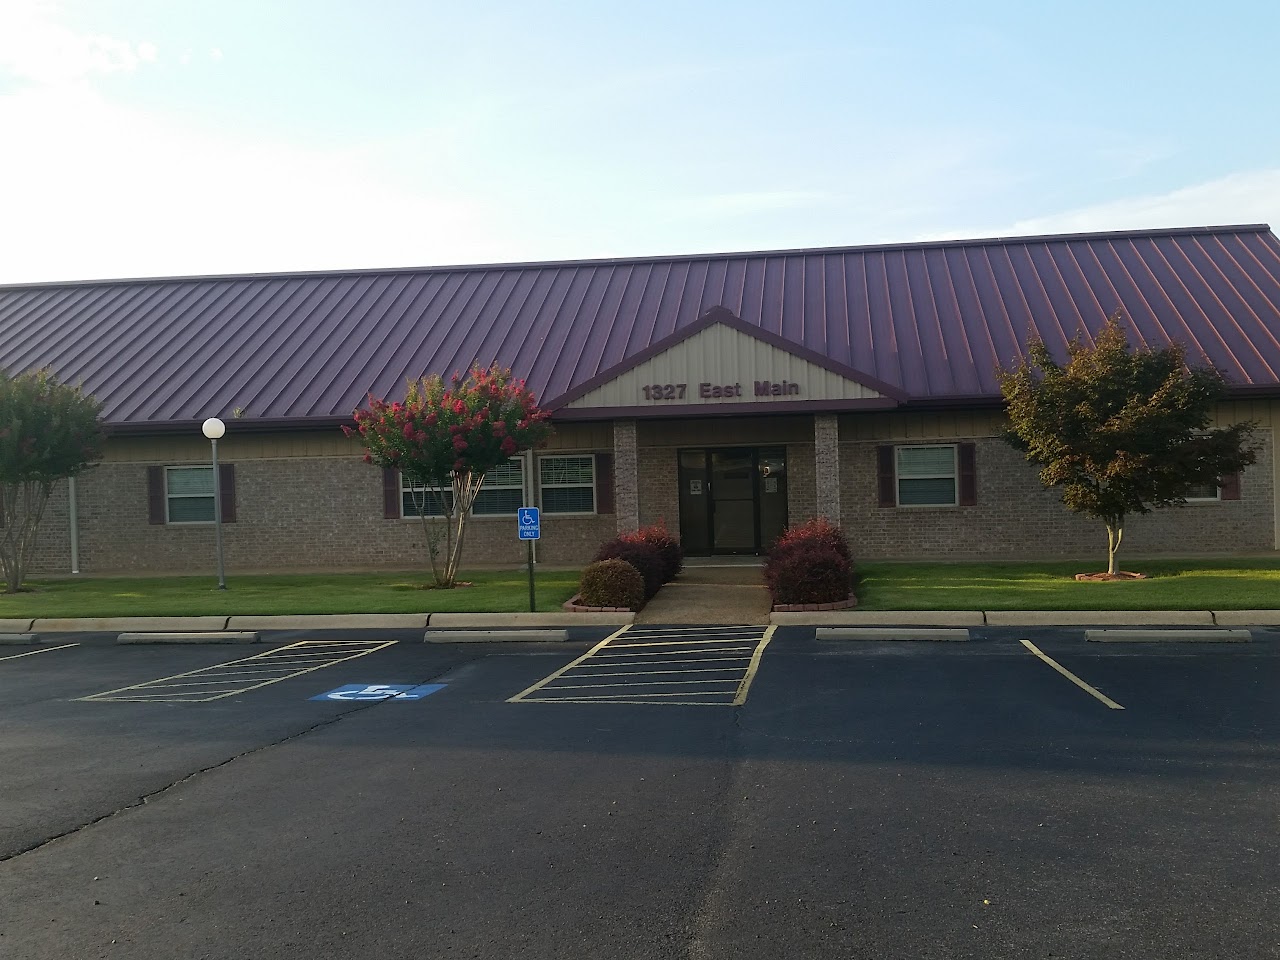 Photo of White River Regional Housing Authority. Affordable housing located at 1327 East Main Street MELBOURNE, AR 72556